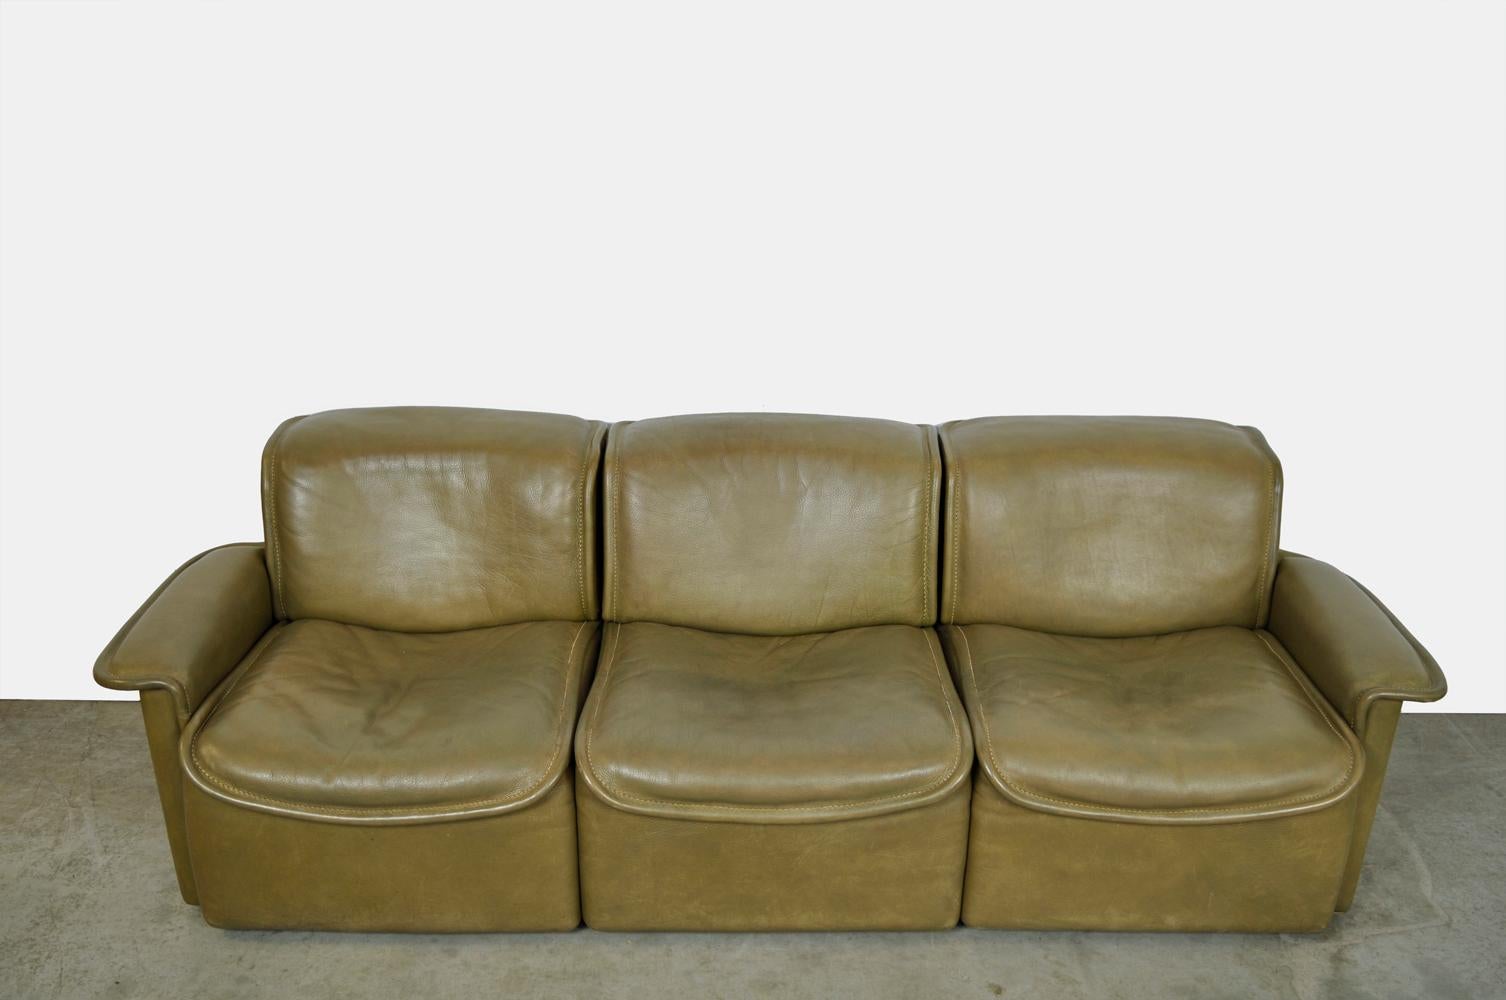 Olive Colored Leather 3-Seater Sofa, Model Ds-12 by De Sede, 1970s Switzerland For Sale 12